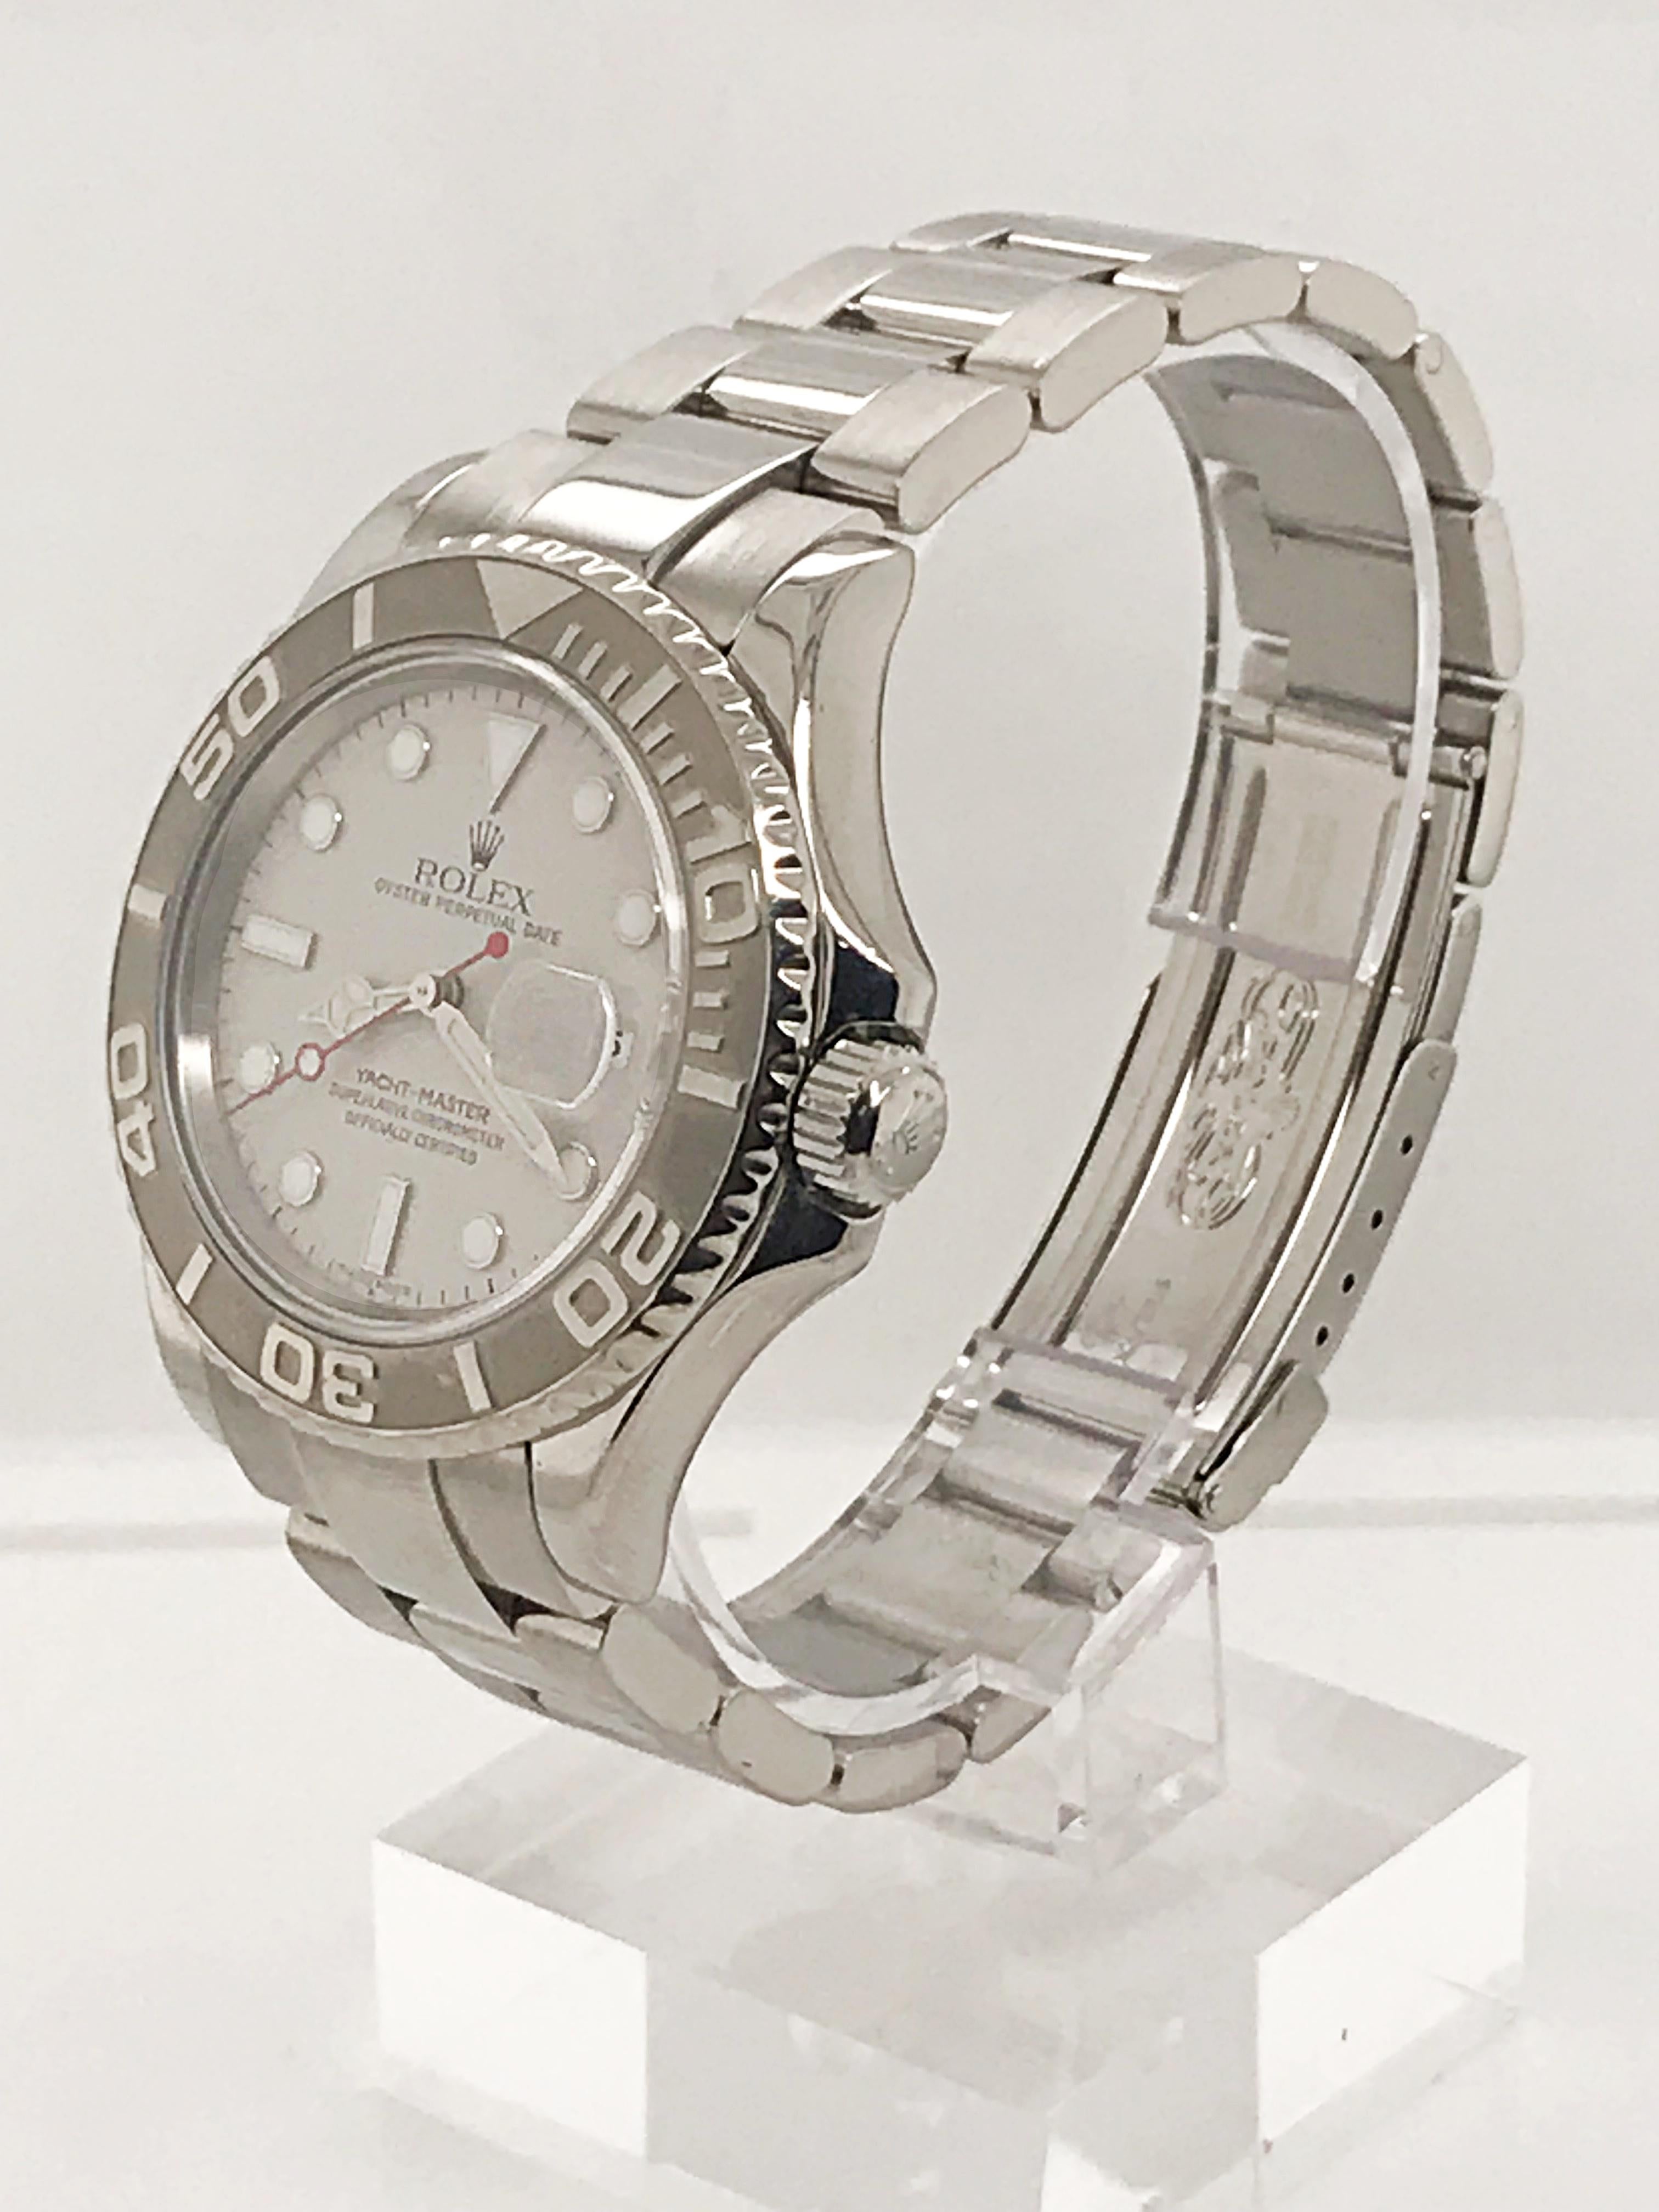 This beautiful 2004 Yachtmaster by Rolex features a Stainless Steel bracelet and rotating Platinum bezel. The bracelet is a Rolex Oysterlink with Oysterlock clasp.

Serial Number - FXXXXXX 
Model Number - 16622

This timepiece was recently serviced